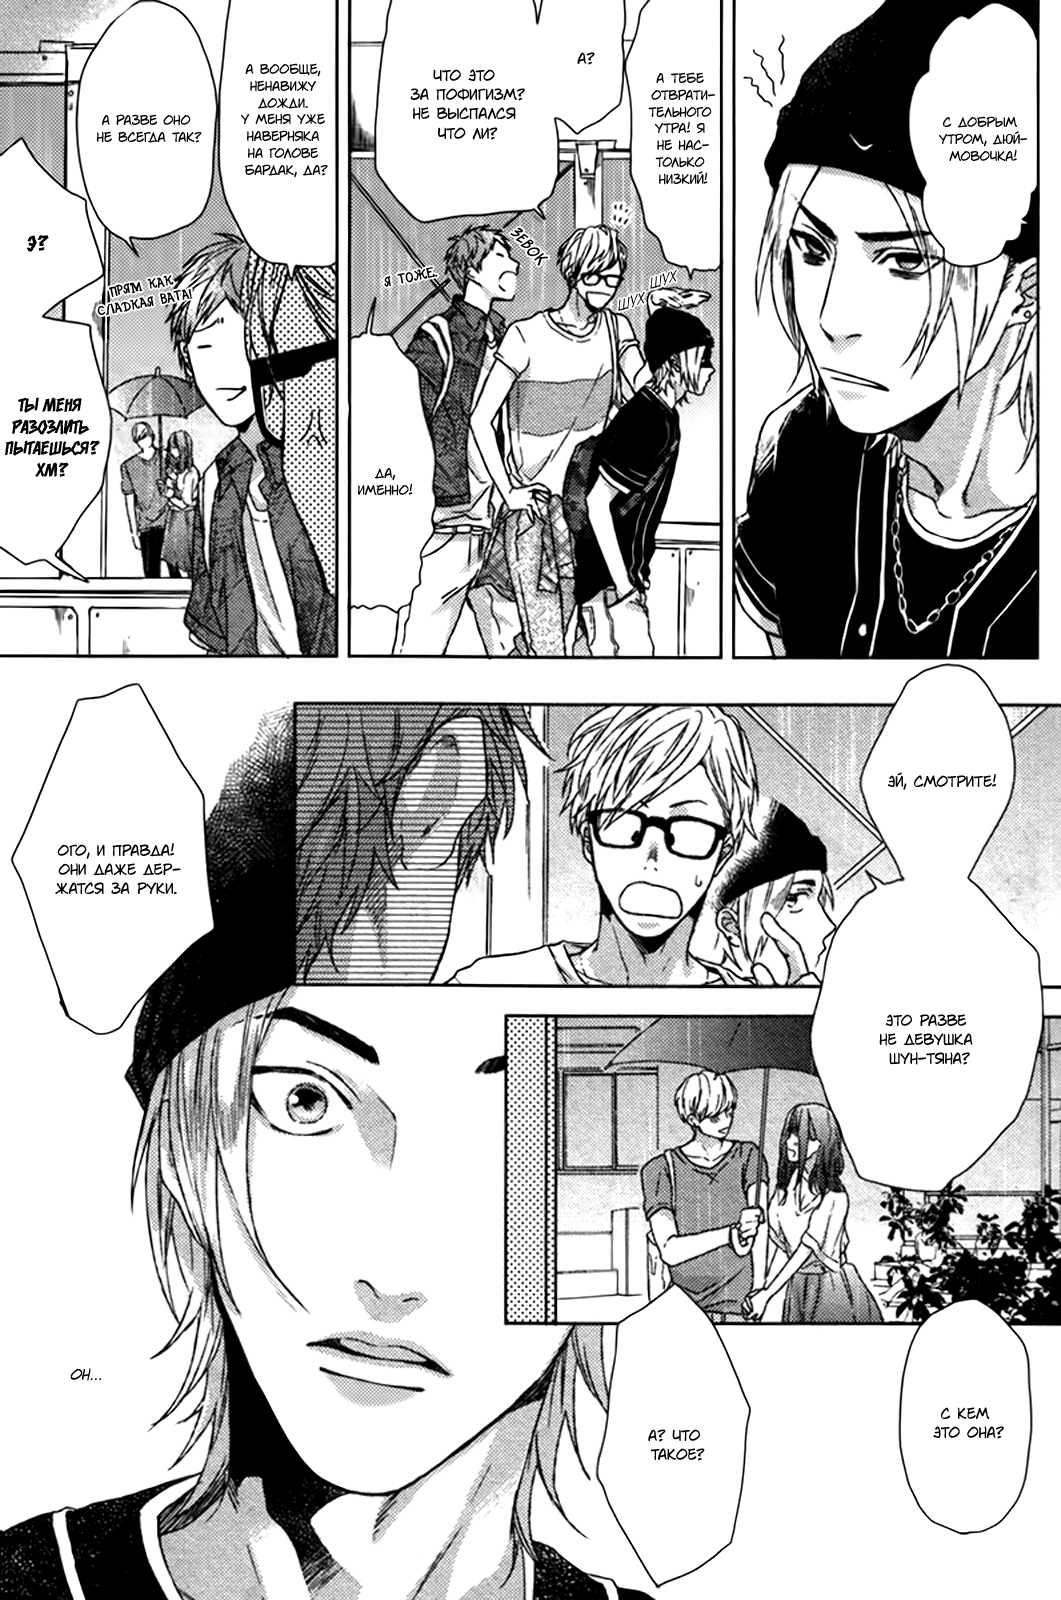 [OGERETSU Tanaka] Farewell, Our Lonely Love Story [RUS] 